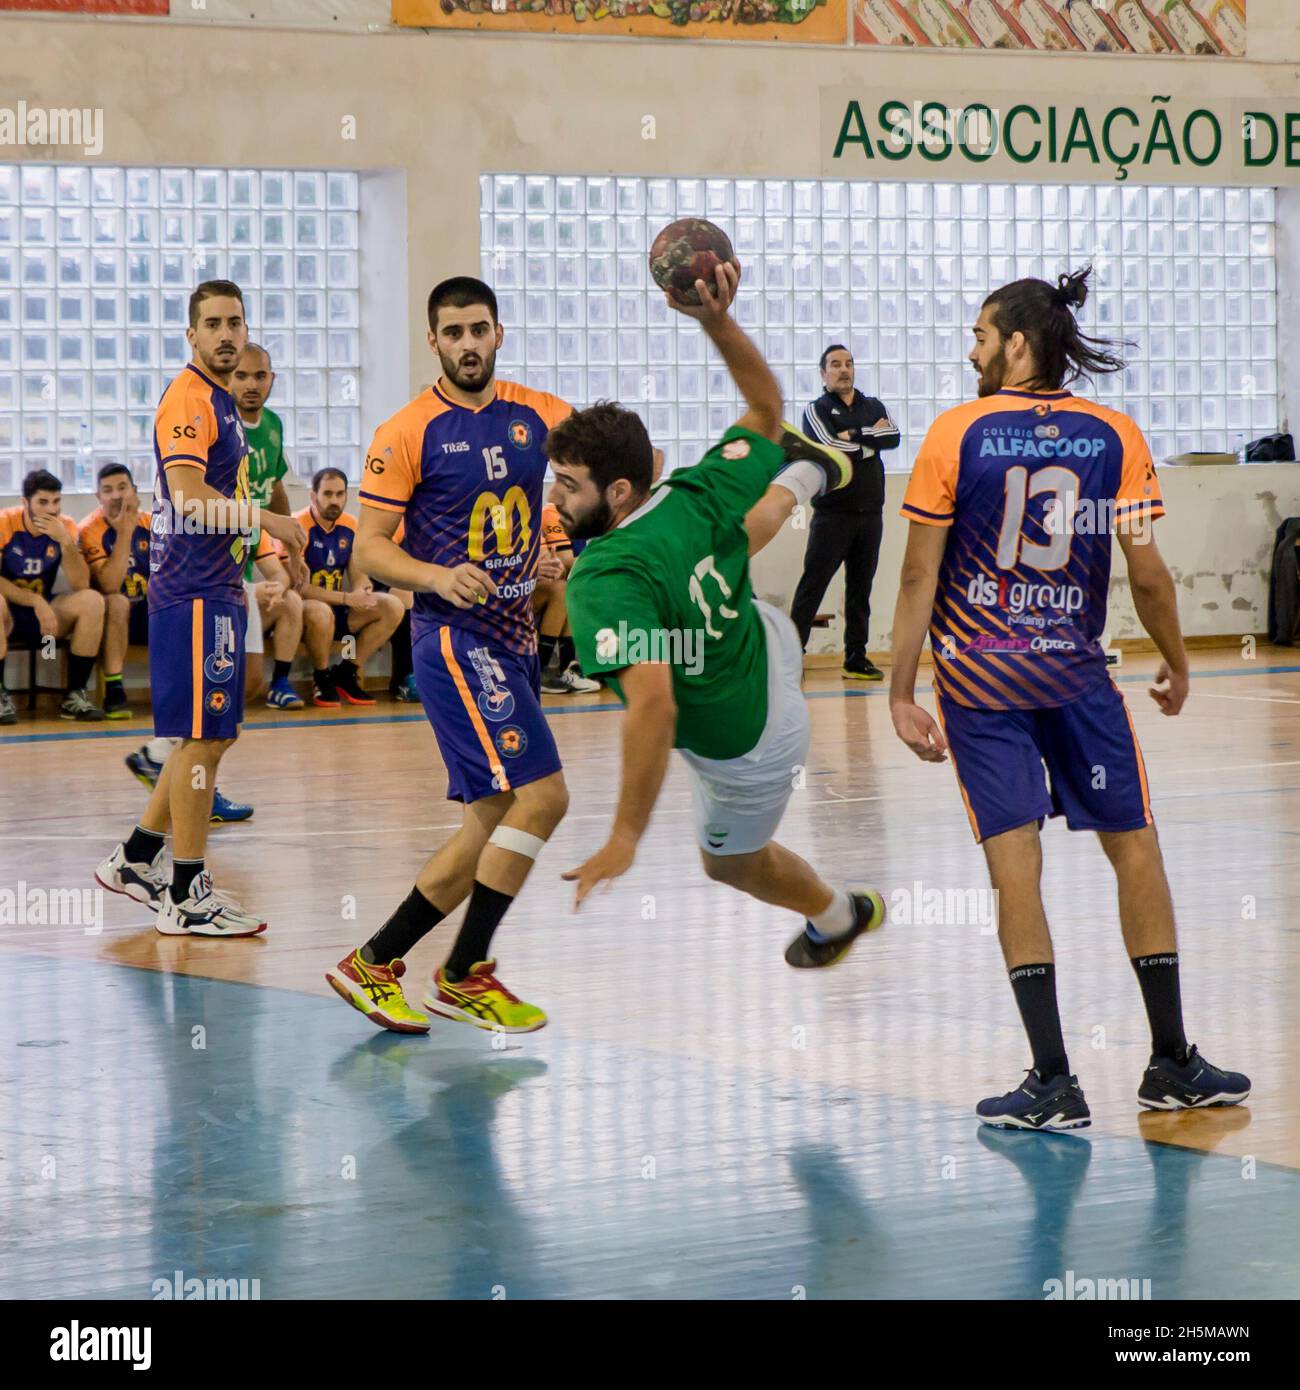 Viana do Castelo, Portugal - October 30, 2021: A.D. Afifense player in  action against Manabola, game counting for the 3rd national Handball  division Stock Photo - Alamy